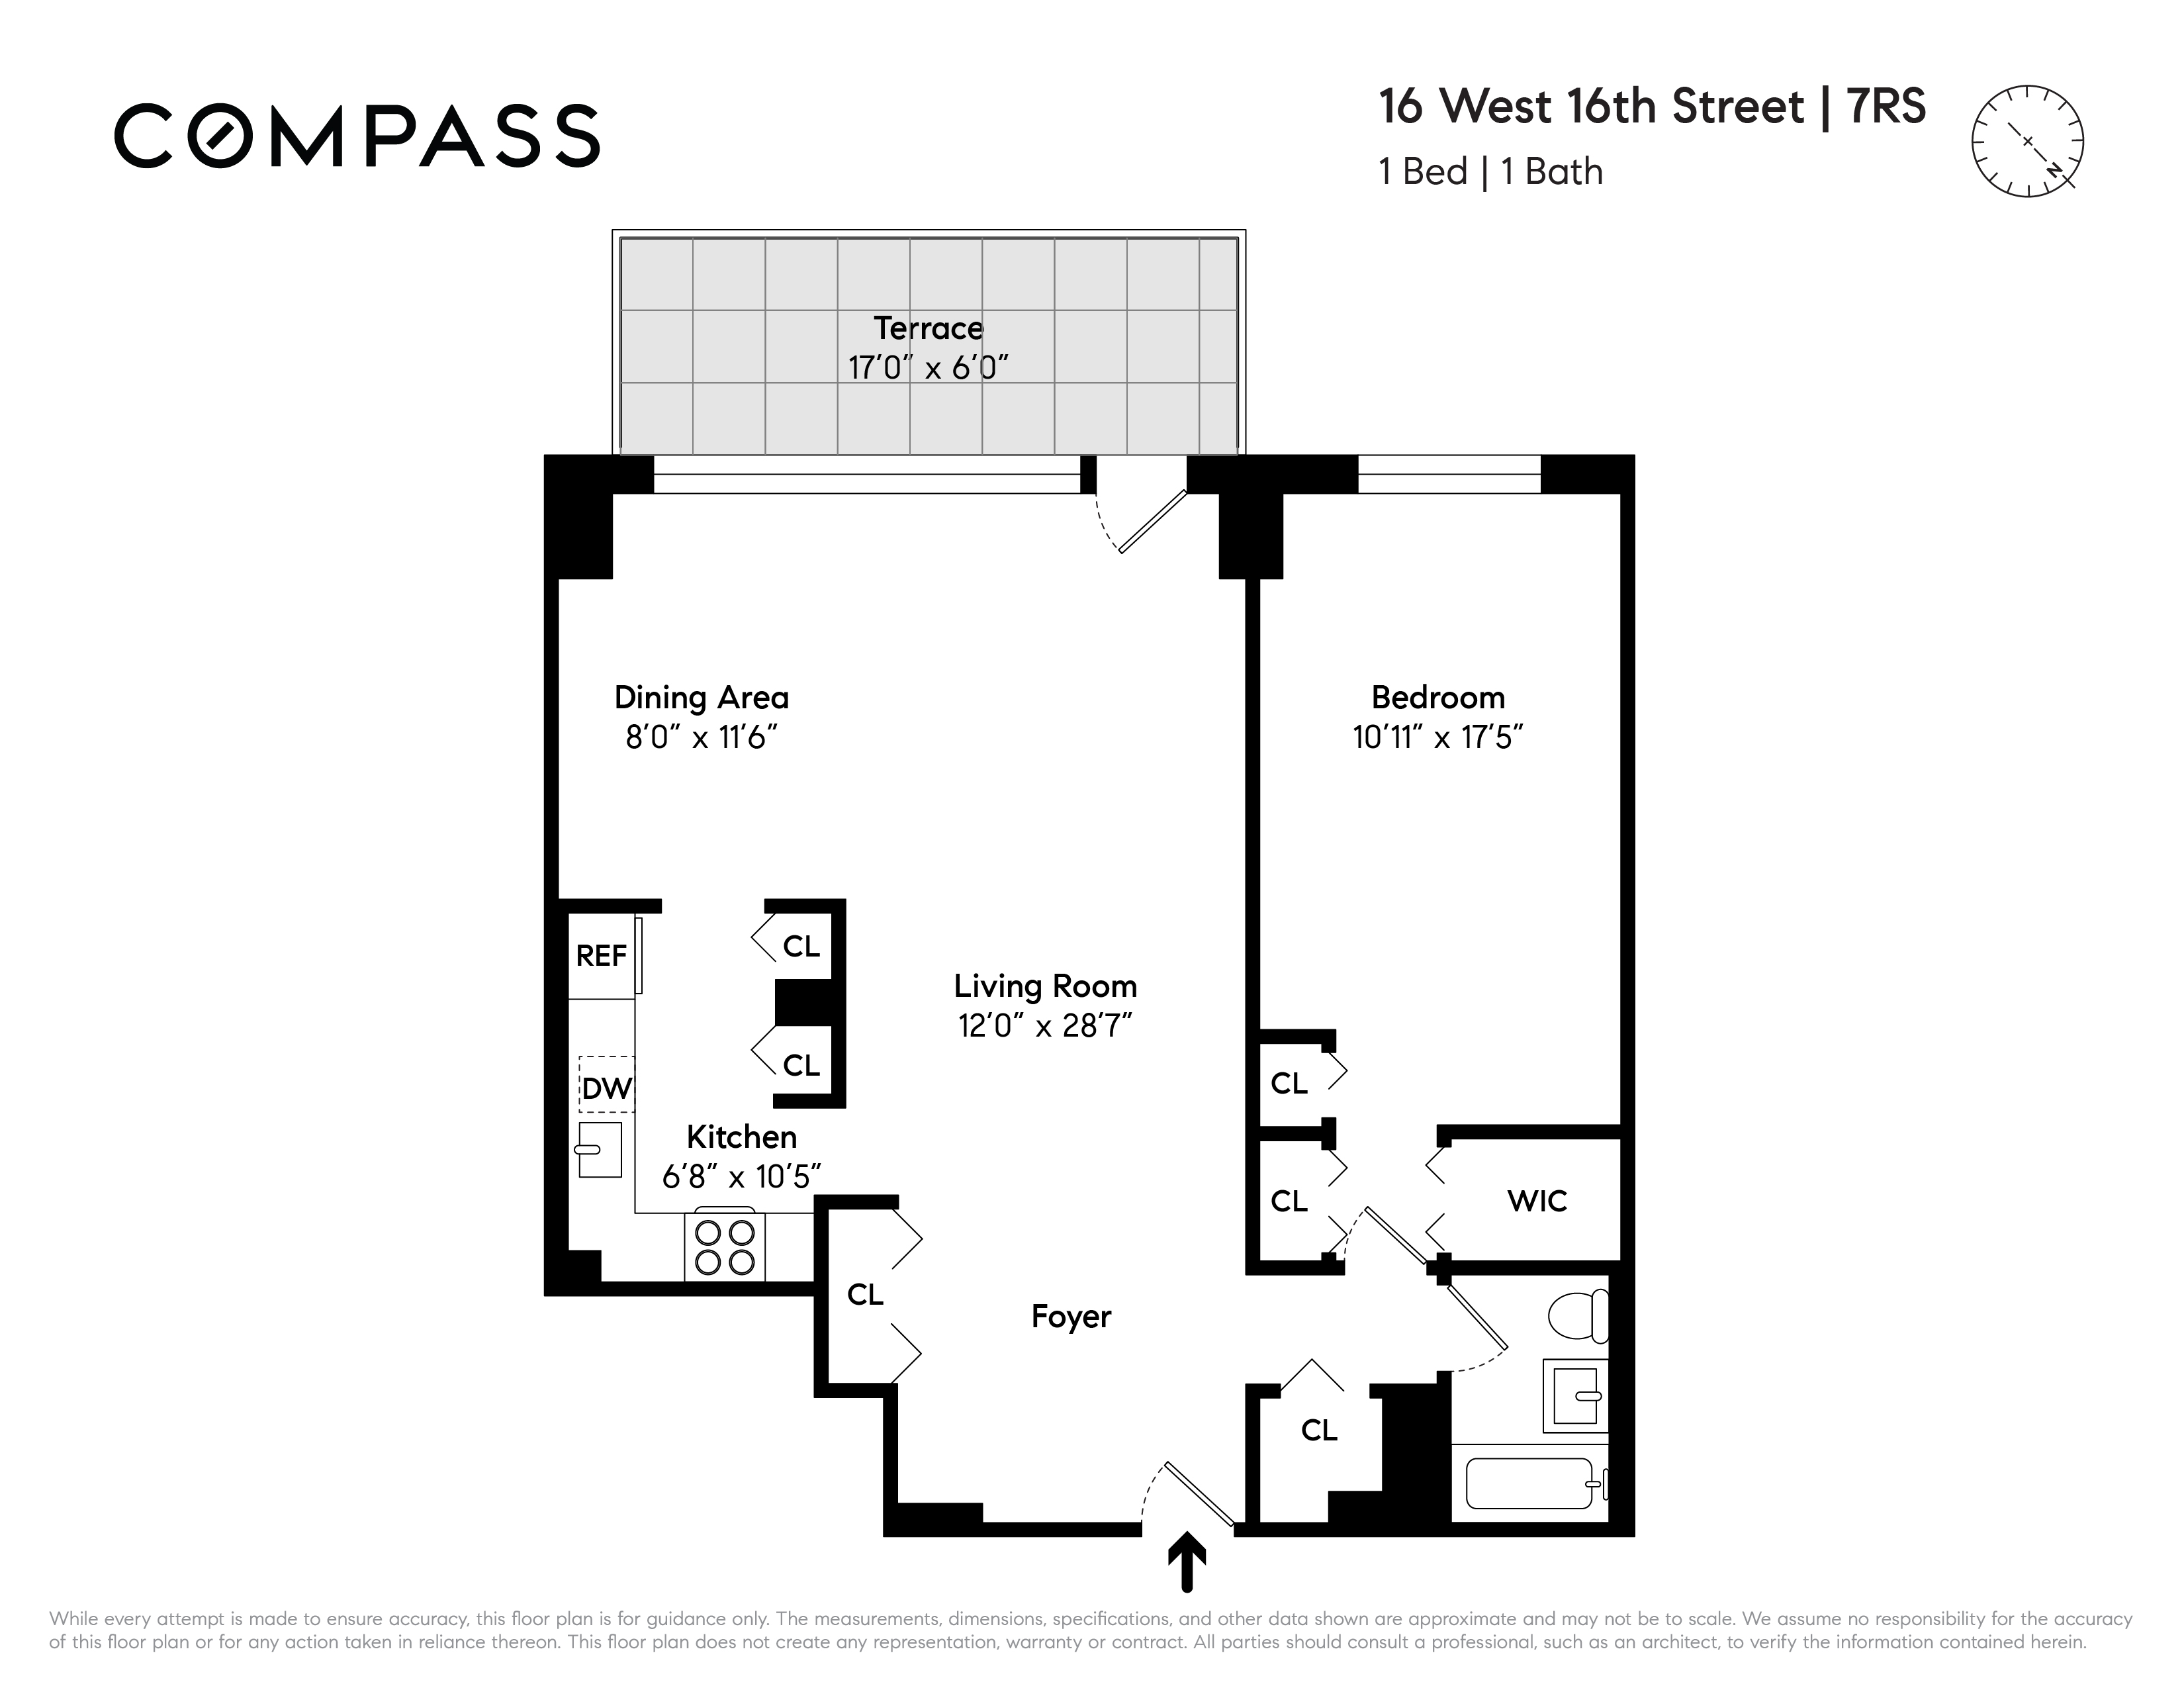 Floorplan for 16 West 16th Street, 7RS